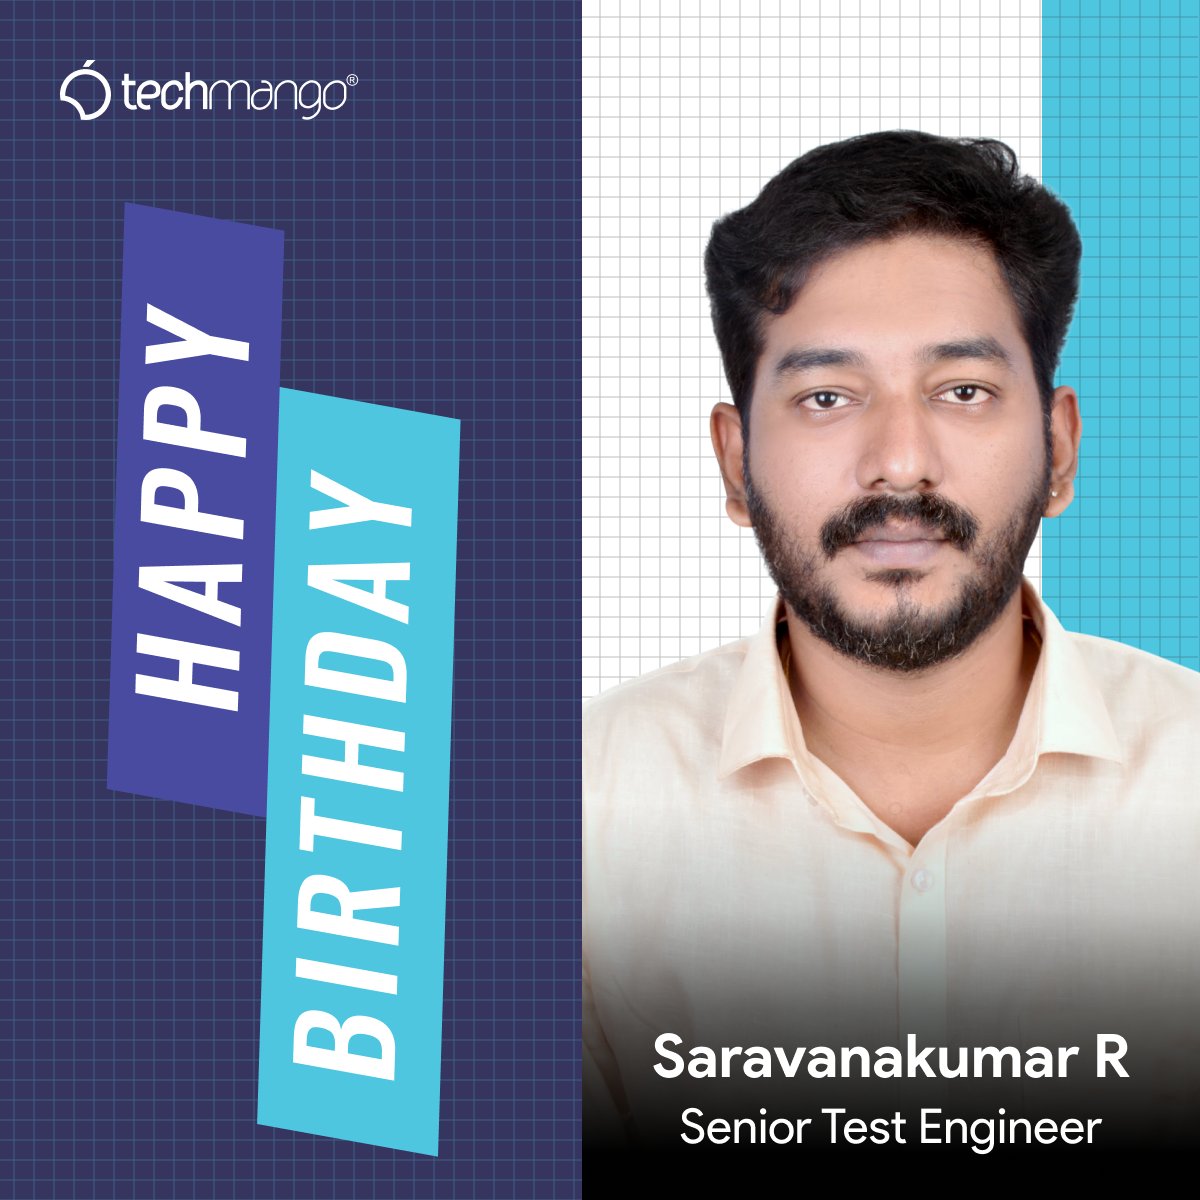 Techmango Wishes a Happy Birthday to Saravanakumar Rajagopal Cheers to another fantastic year ahead! May this birthday be the start of your greatest, most wonderful journey yet. Have a fantastic day! #happybirthday #birthdaywishes #birthdaycelebration #birthdayparty